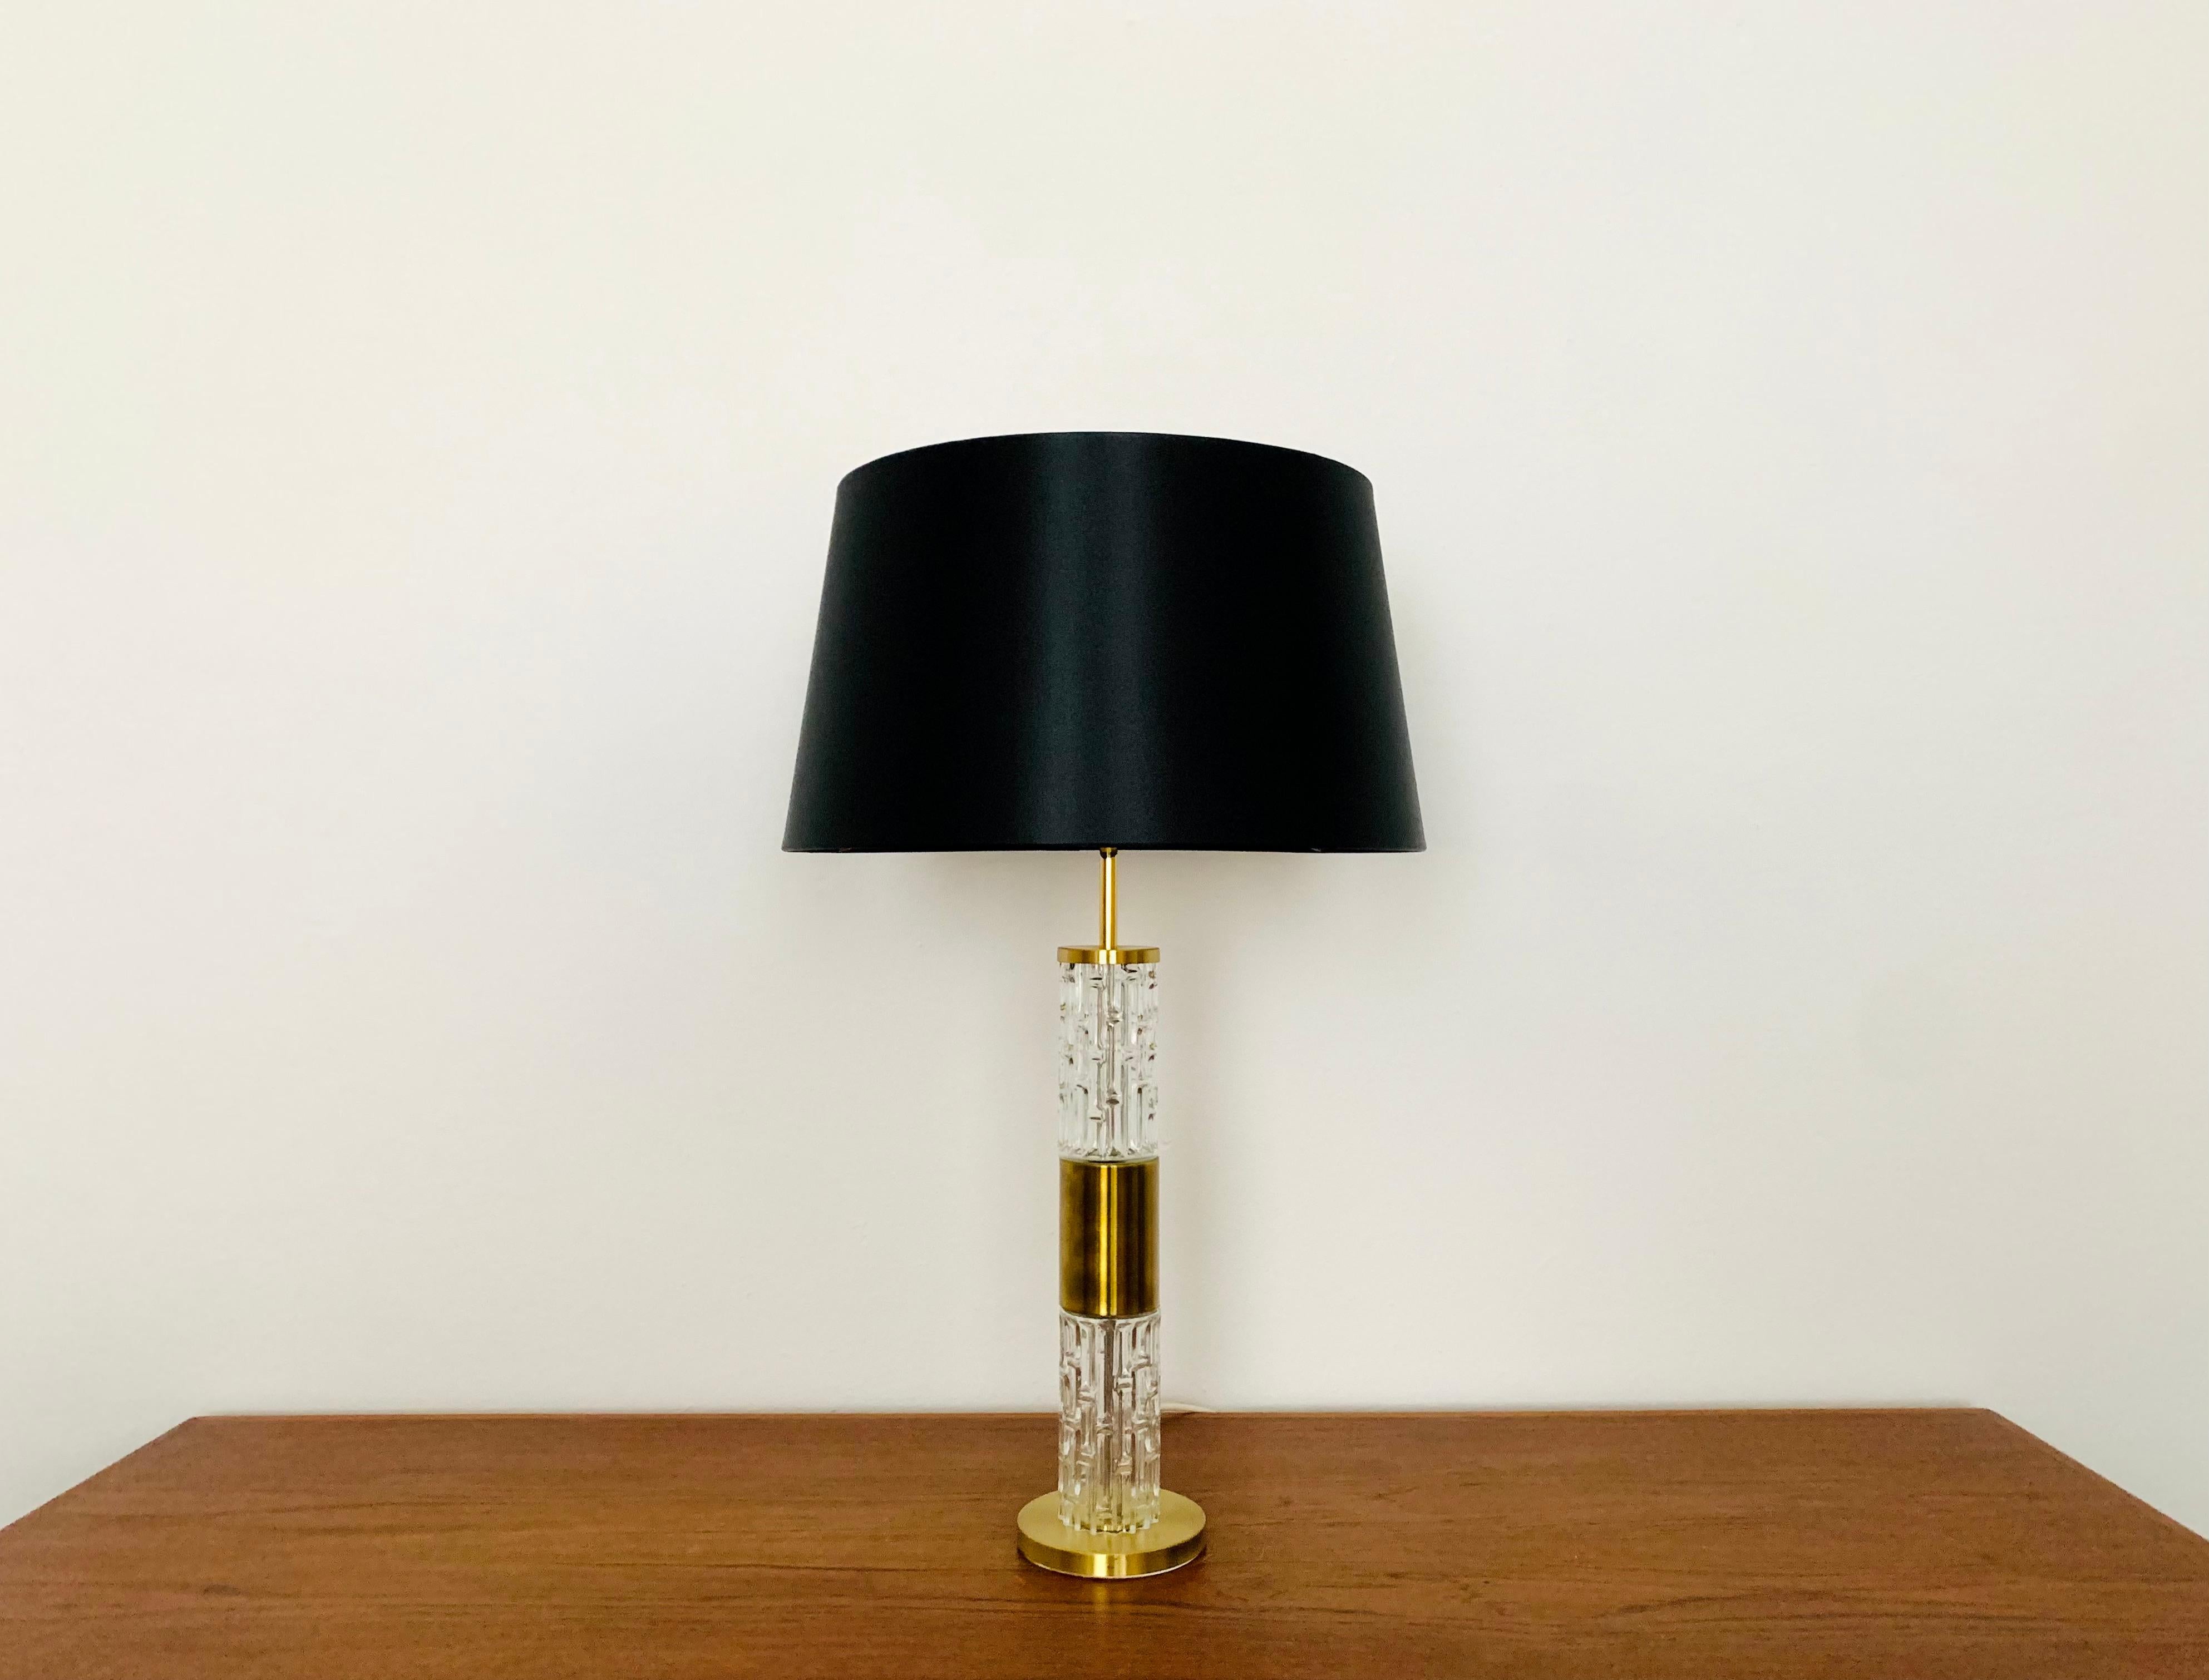 Very nice glass table lamp by Doria from the 1960s.
Very elegant Hollywood Regency design with a fantastically glamorous look.

Manufacturer: Doria

Condition:

Very good vintage condition with slight signs of wear consistent with age.
The